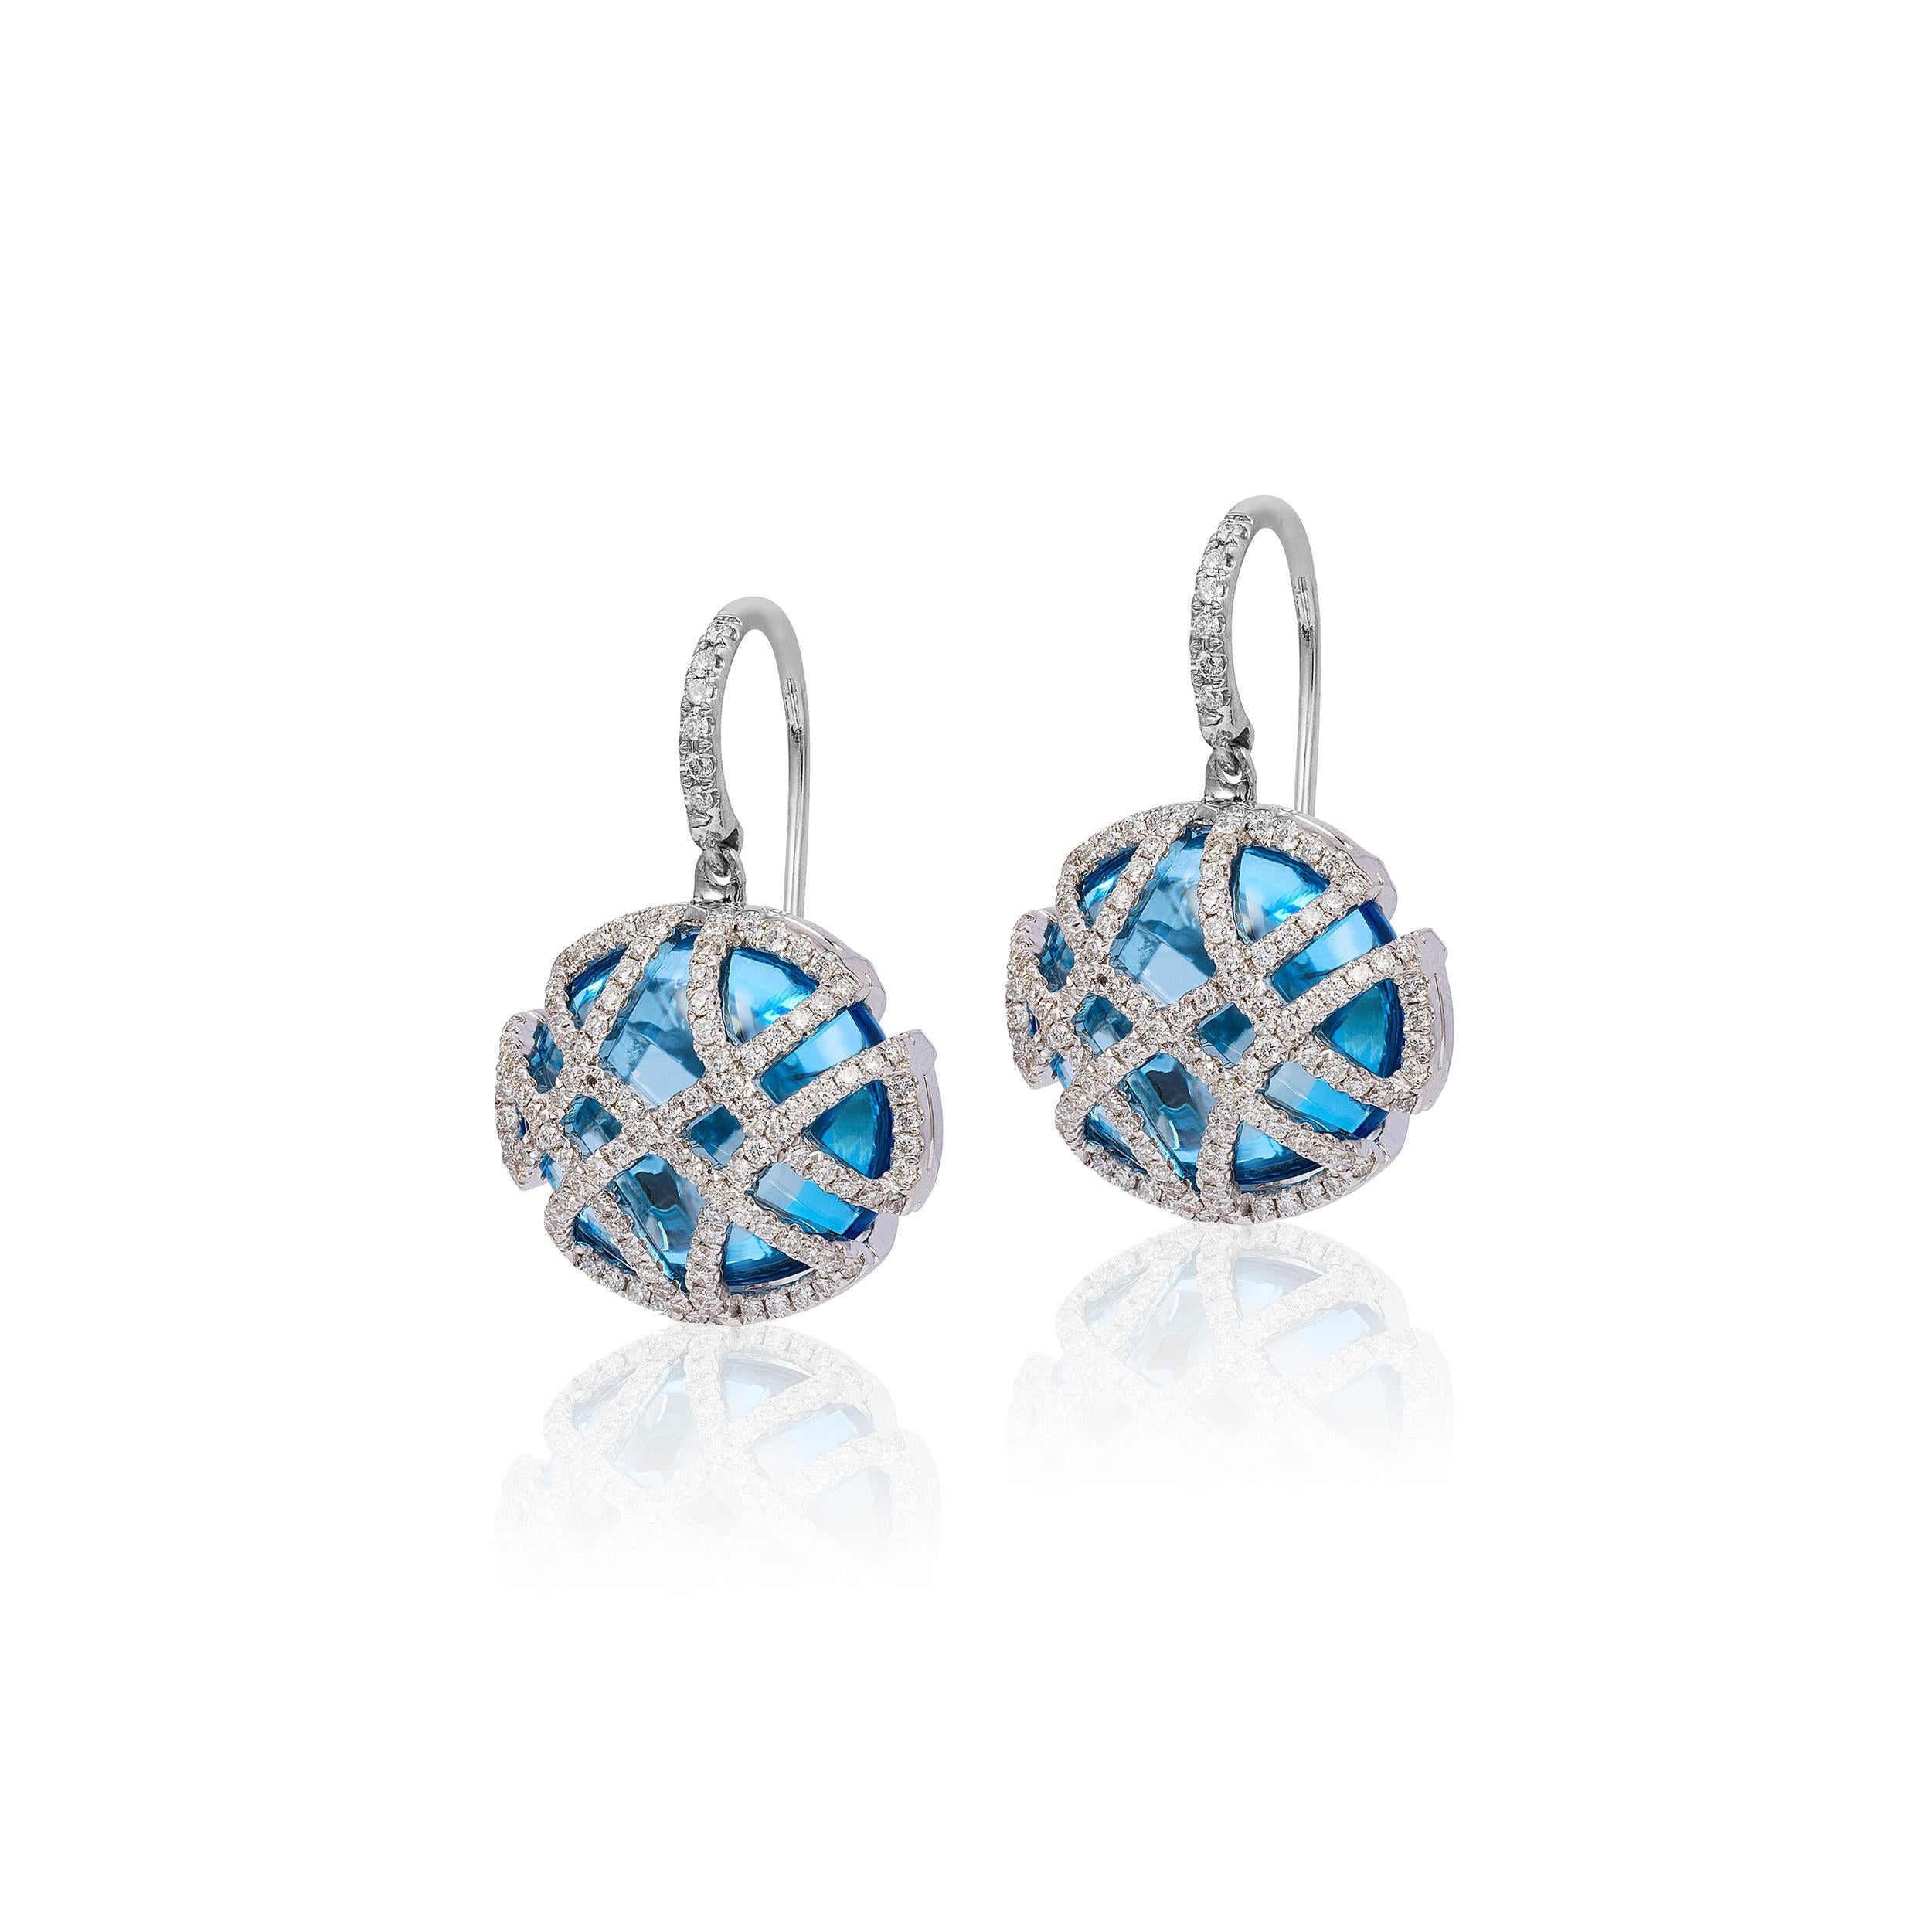 Blue Topaz Oblong Cage Earring with Diamonds on Wire in 18K White Gold, from 'Freedom' Collection
 
 Stone Size: 16 x 13.5 mm
 
 Gemstone Approx Wt: Blue Topaz- 32.95 Carats 
 
 Diamonds: G-H / VS, Approx Wt: 1.12 Carats